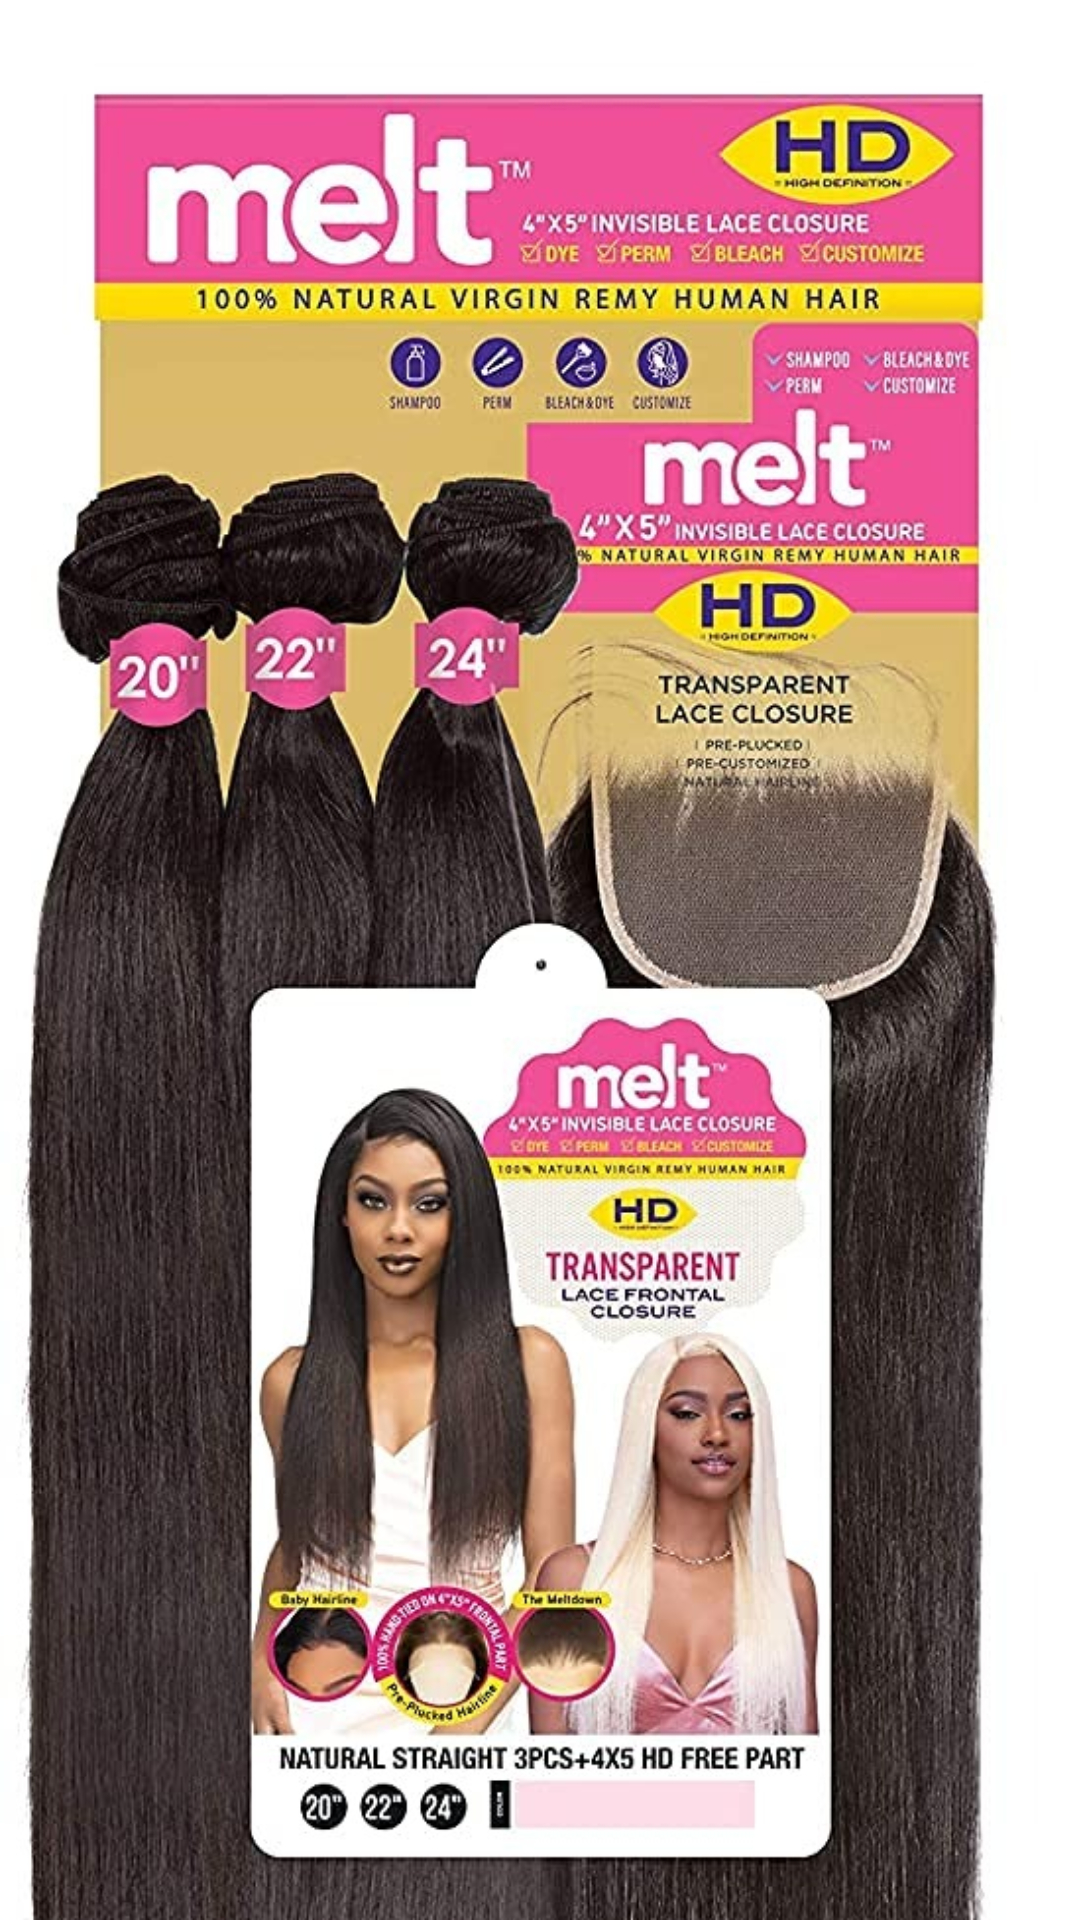 Janet melt 4x5 Invisible Lace Closure HD - Cali's Beauty Supply